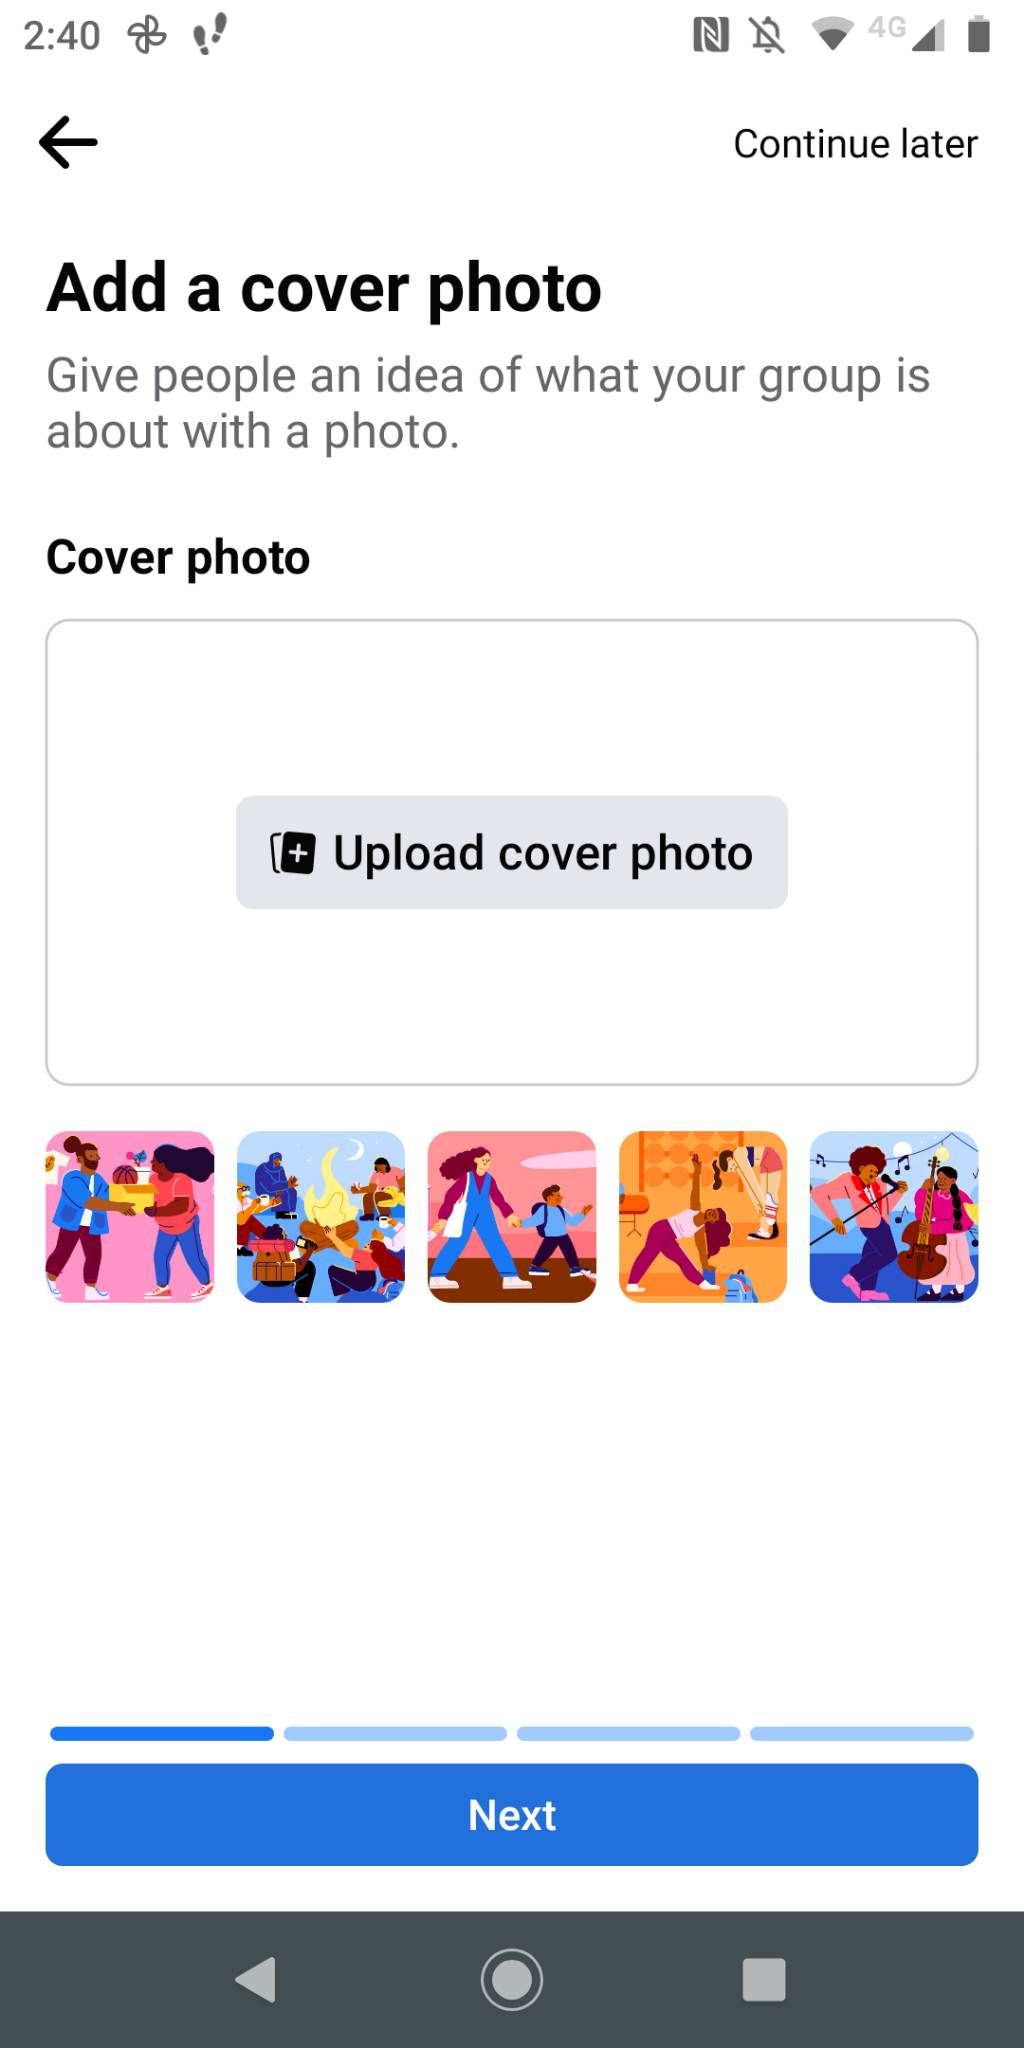 Add a cover photo to a group page option on Facebook